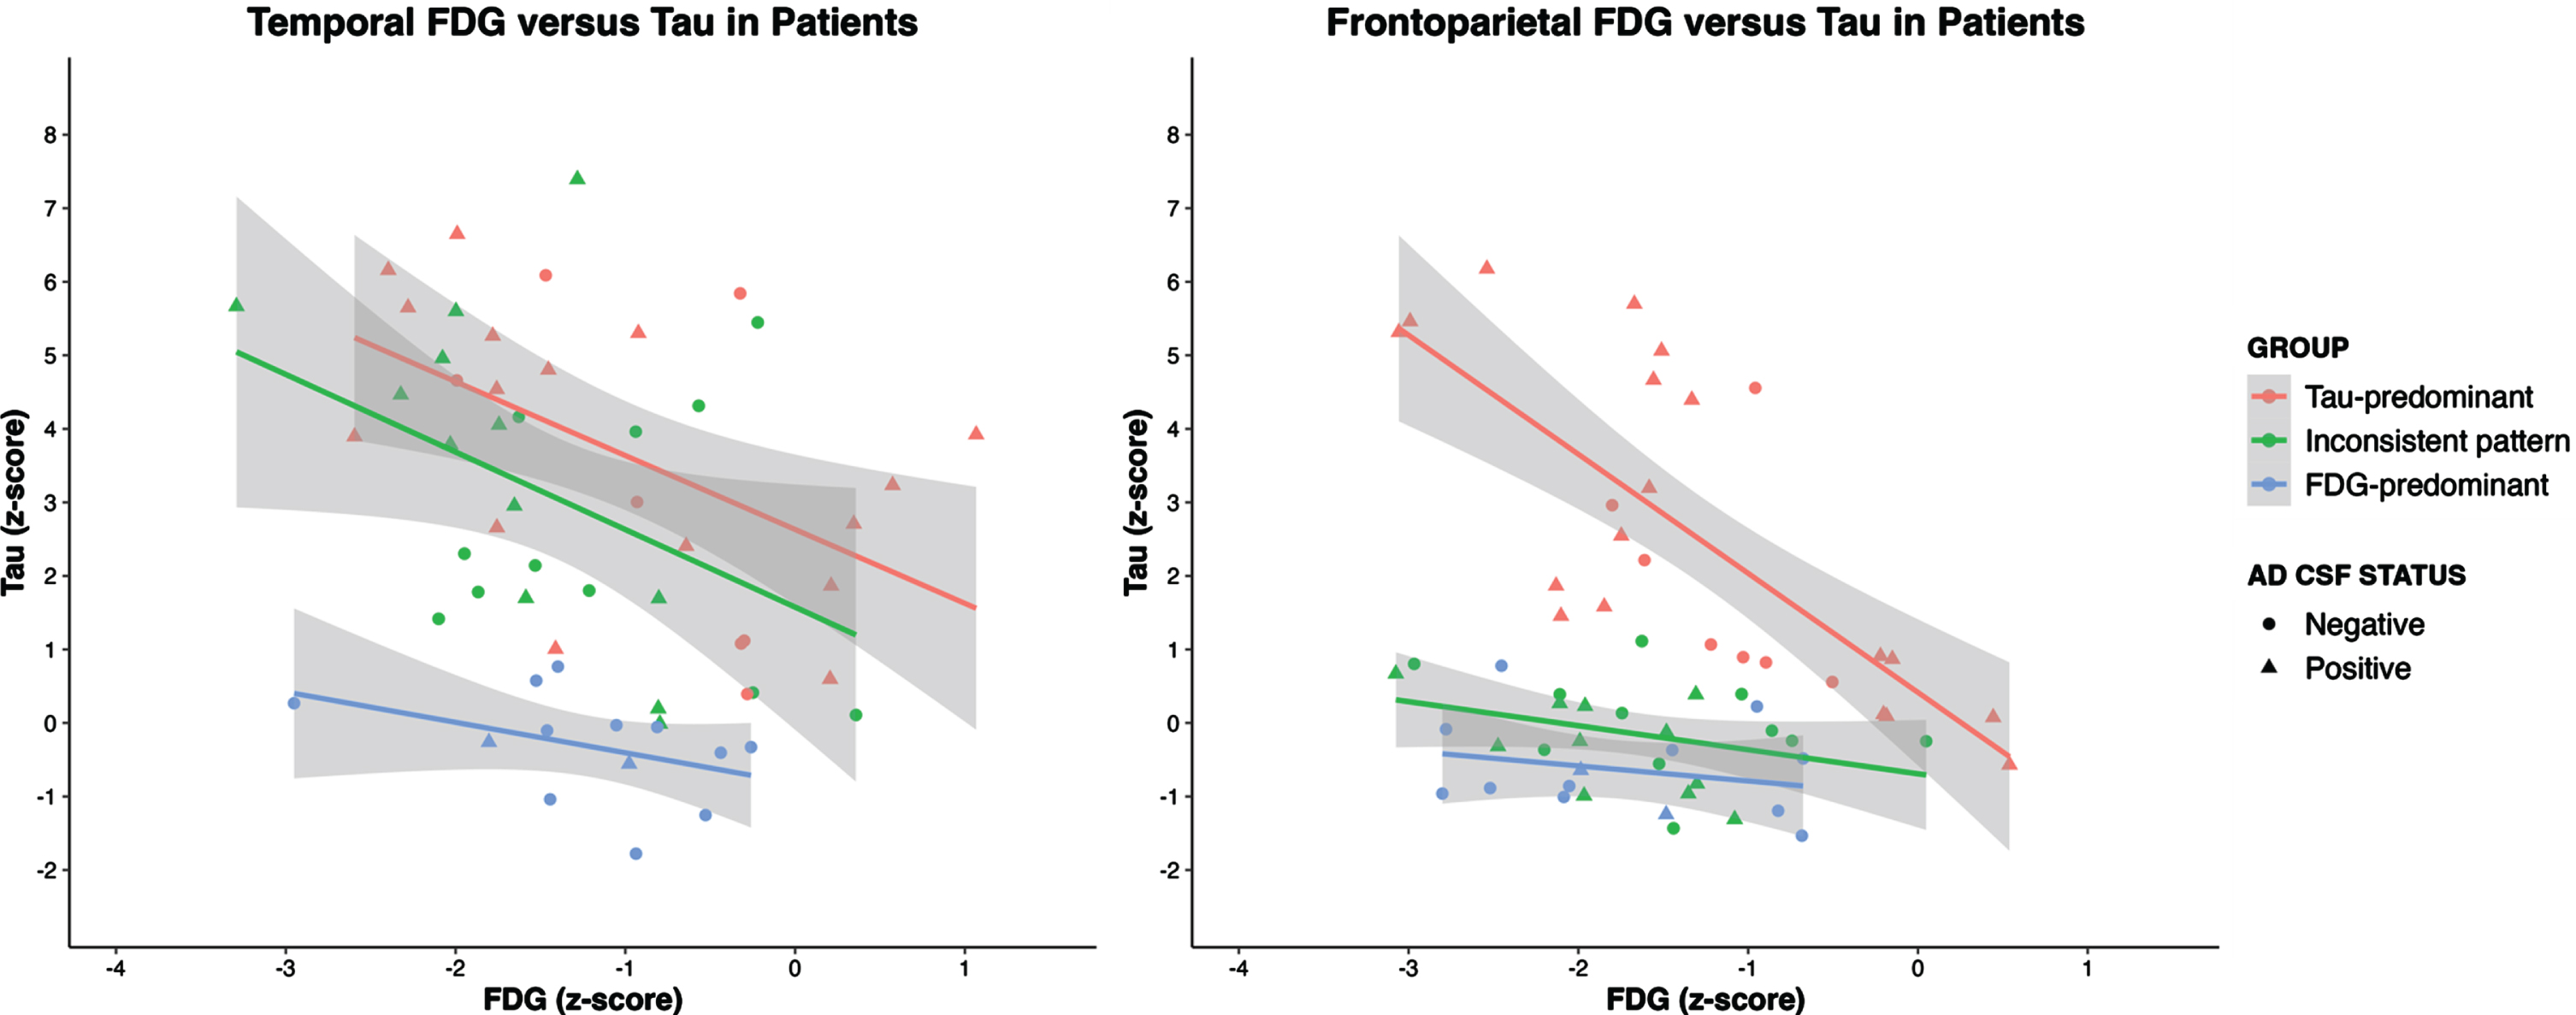 Temporal and Frontoparietal Tau versus FDG in Patients. CSF positivity is defined by a Total Tau/Aβ42 ratio > 1.1 [47]. Group legend: Tau-predominant corresponds to Tau≥FDG both in the temporal and in the frontoparietal. Inconsistent corresponds to Tau≥FDG in the temporal and Tau < FDG in the frontoparietal. FDG-predominant corresponds to Tau < FDG both in the temporal and in the frontoparietal lobe.